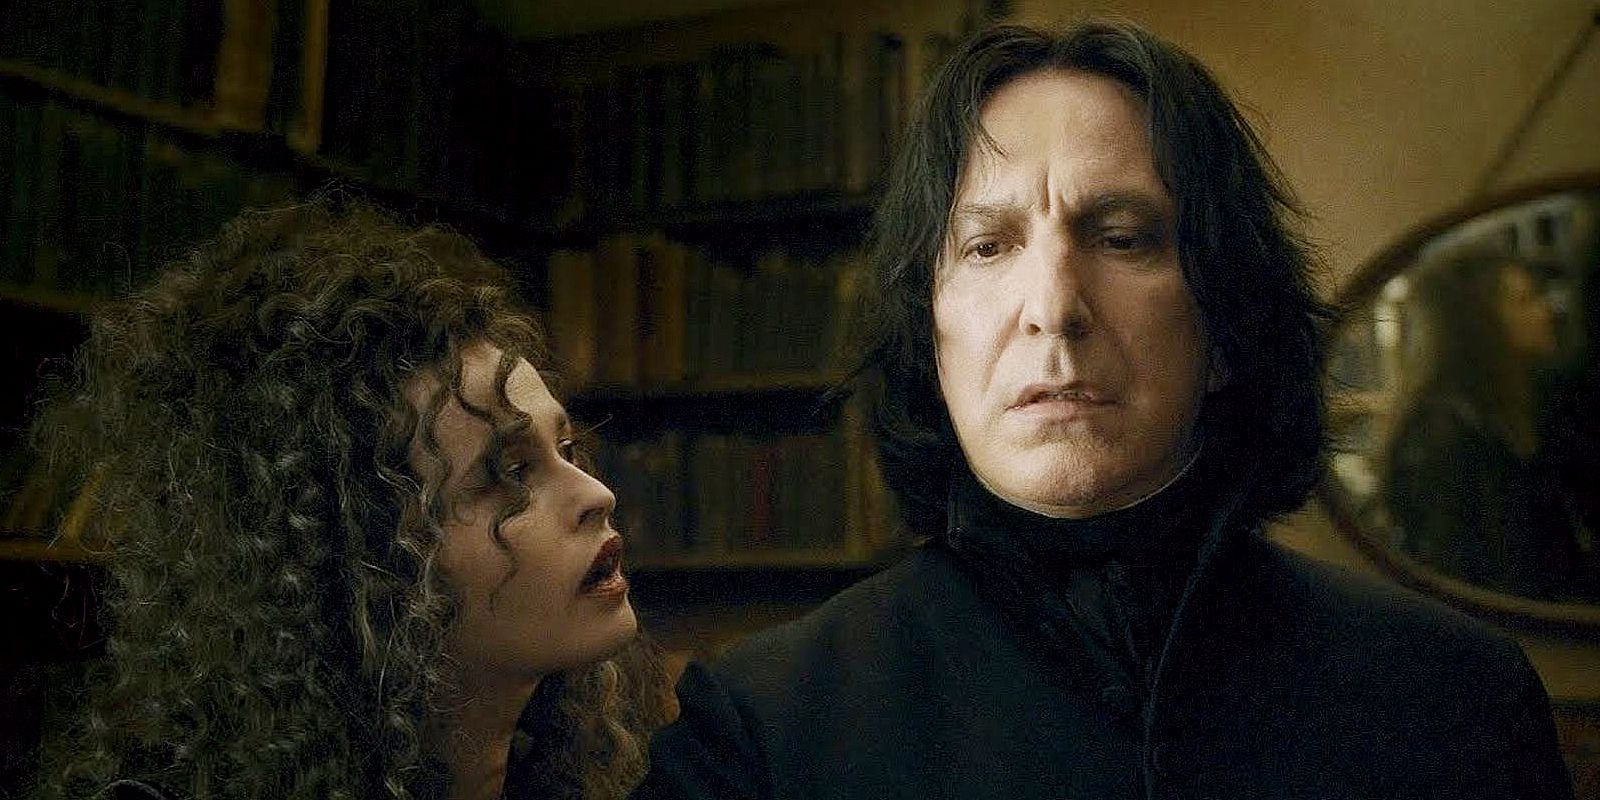 Harry Potter Hogwarts Professors Ranked From Most Heroic To Most Villainous